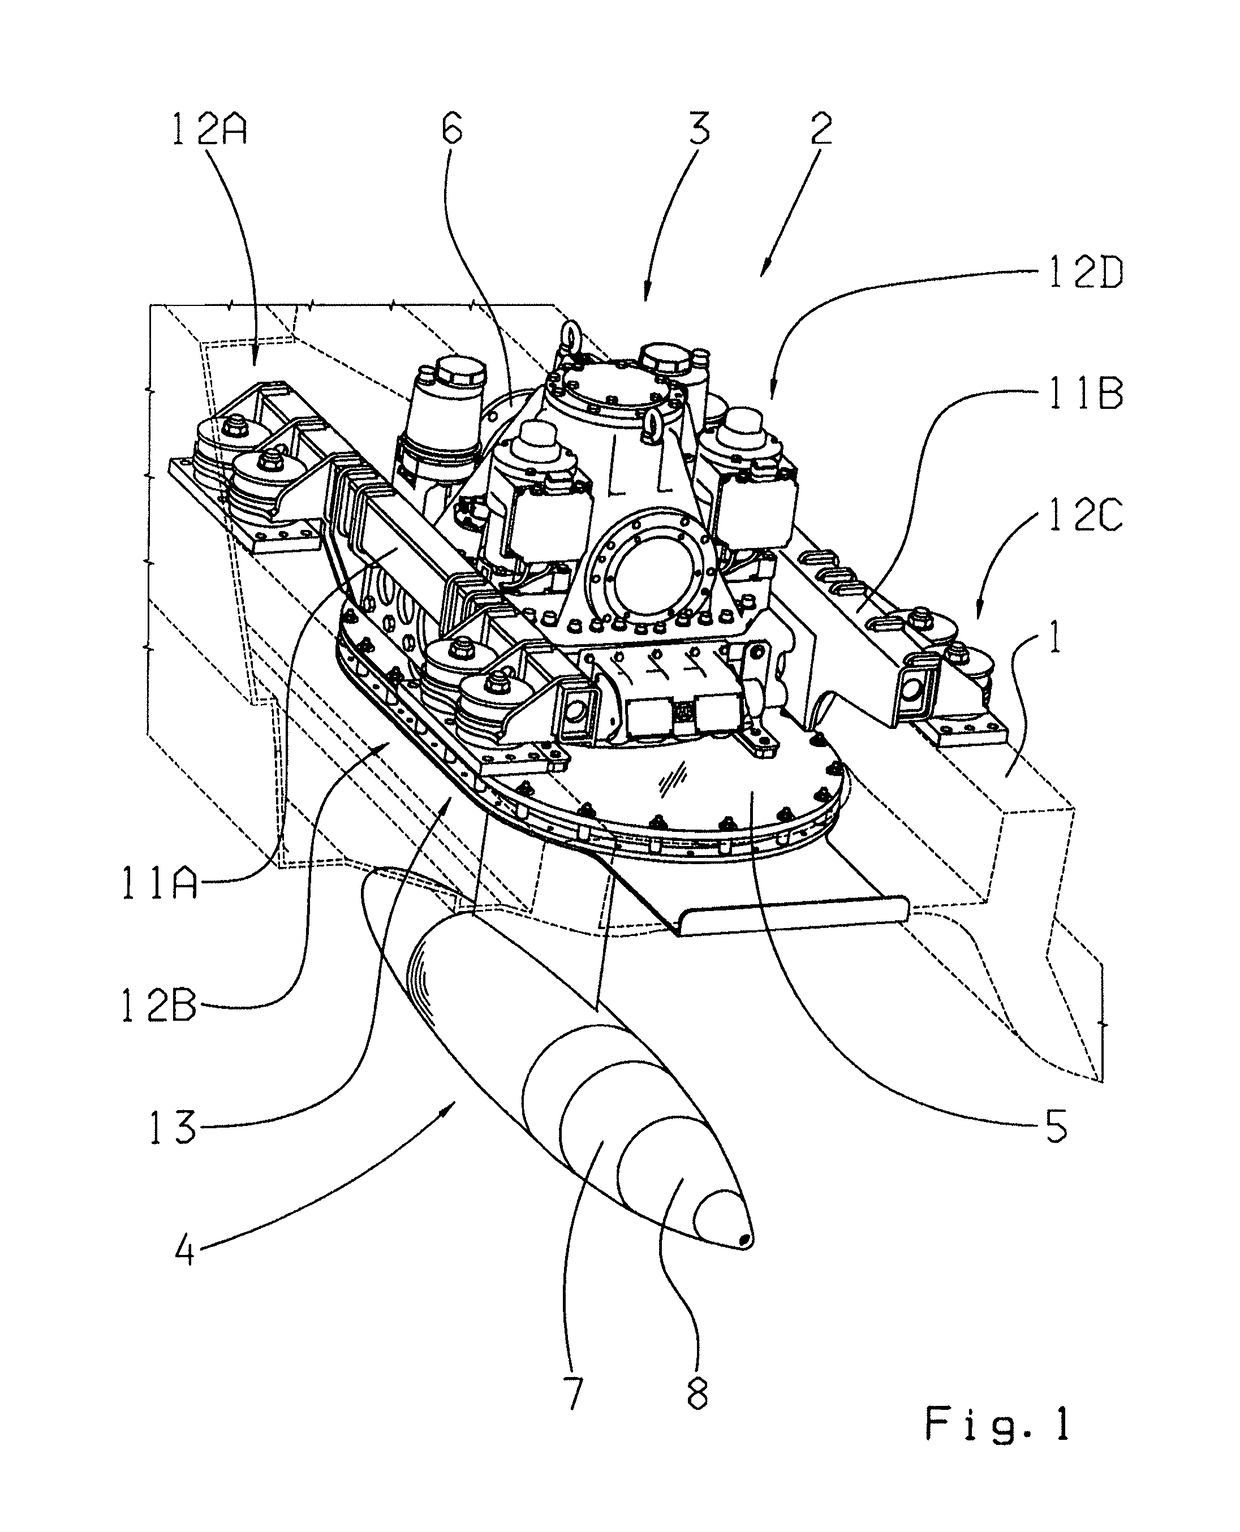 Drive arrangement for an inboard-outboard drive engine of a watercraft